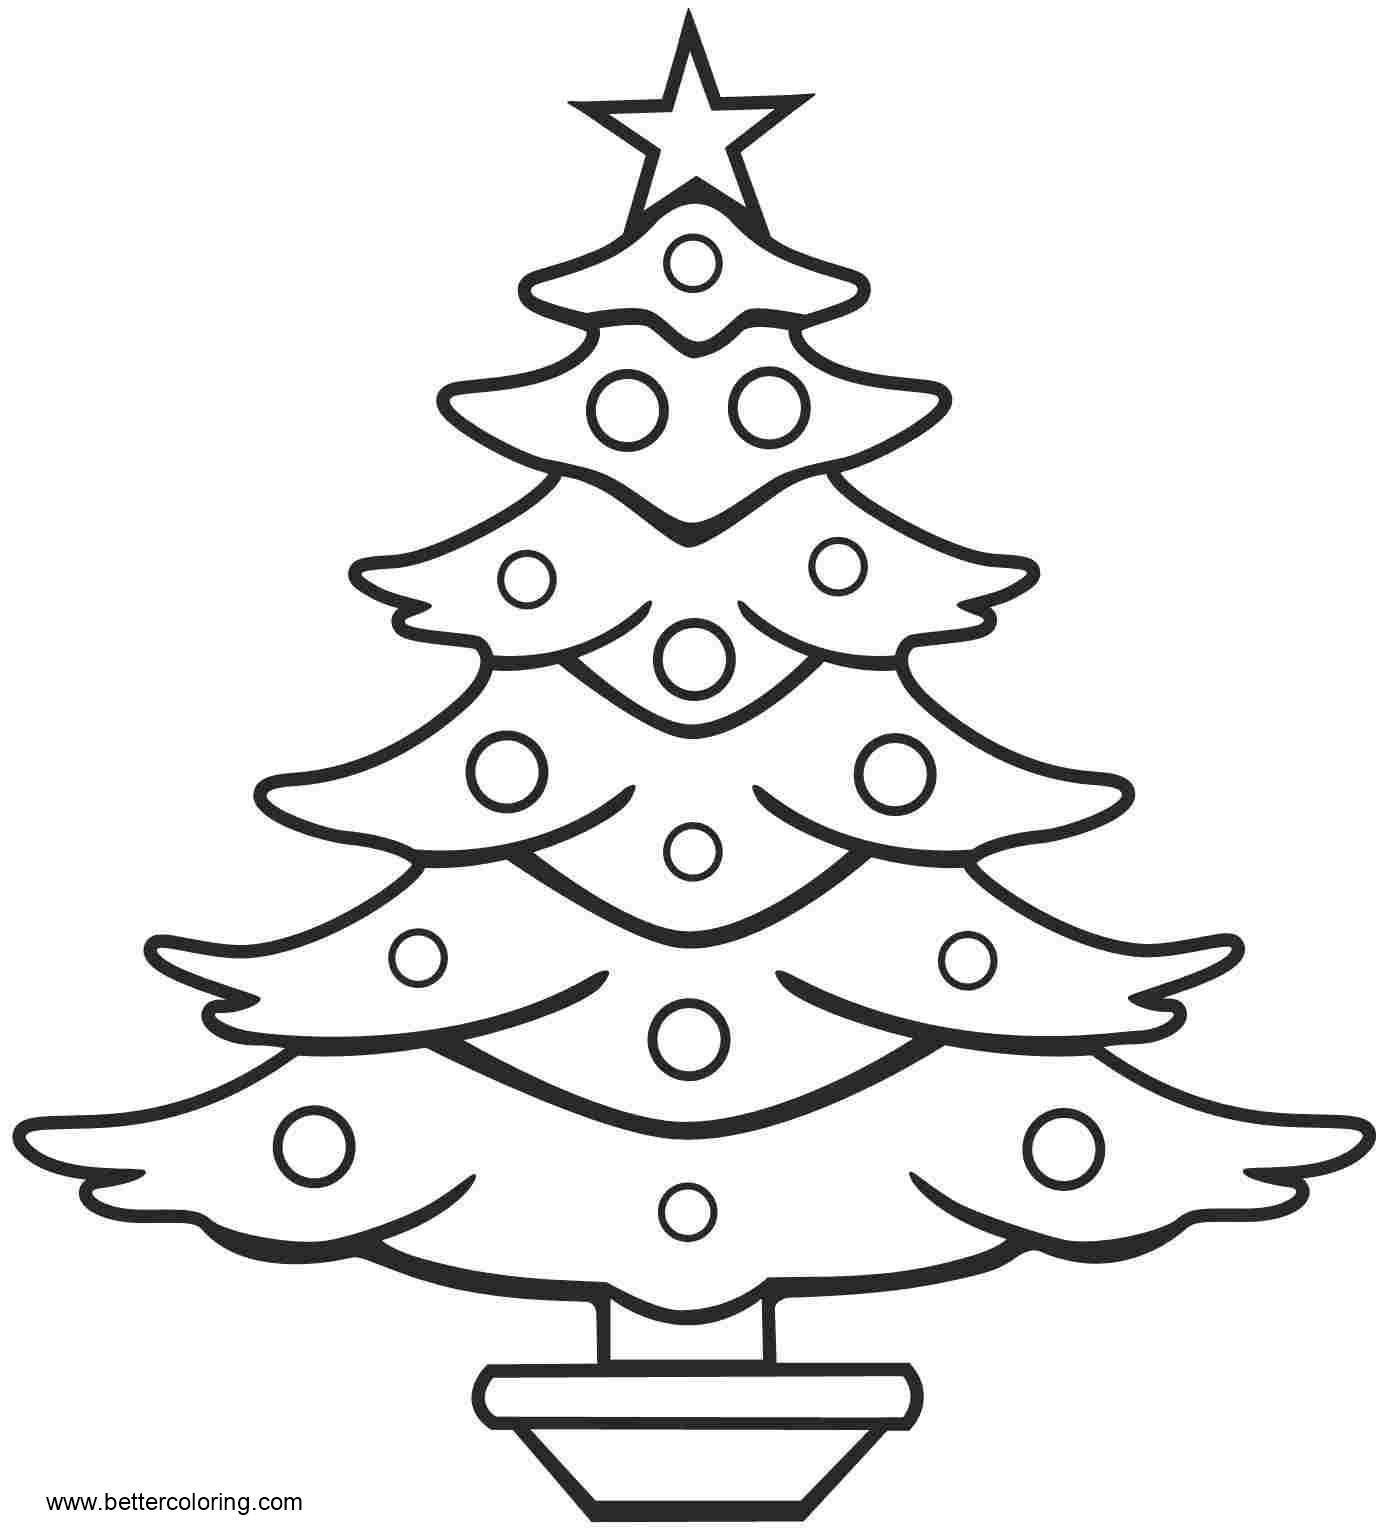 Simple Christmas Tree Coloring Pages Line Art Free Printable Coloring Pages